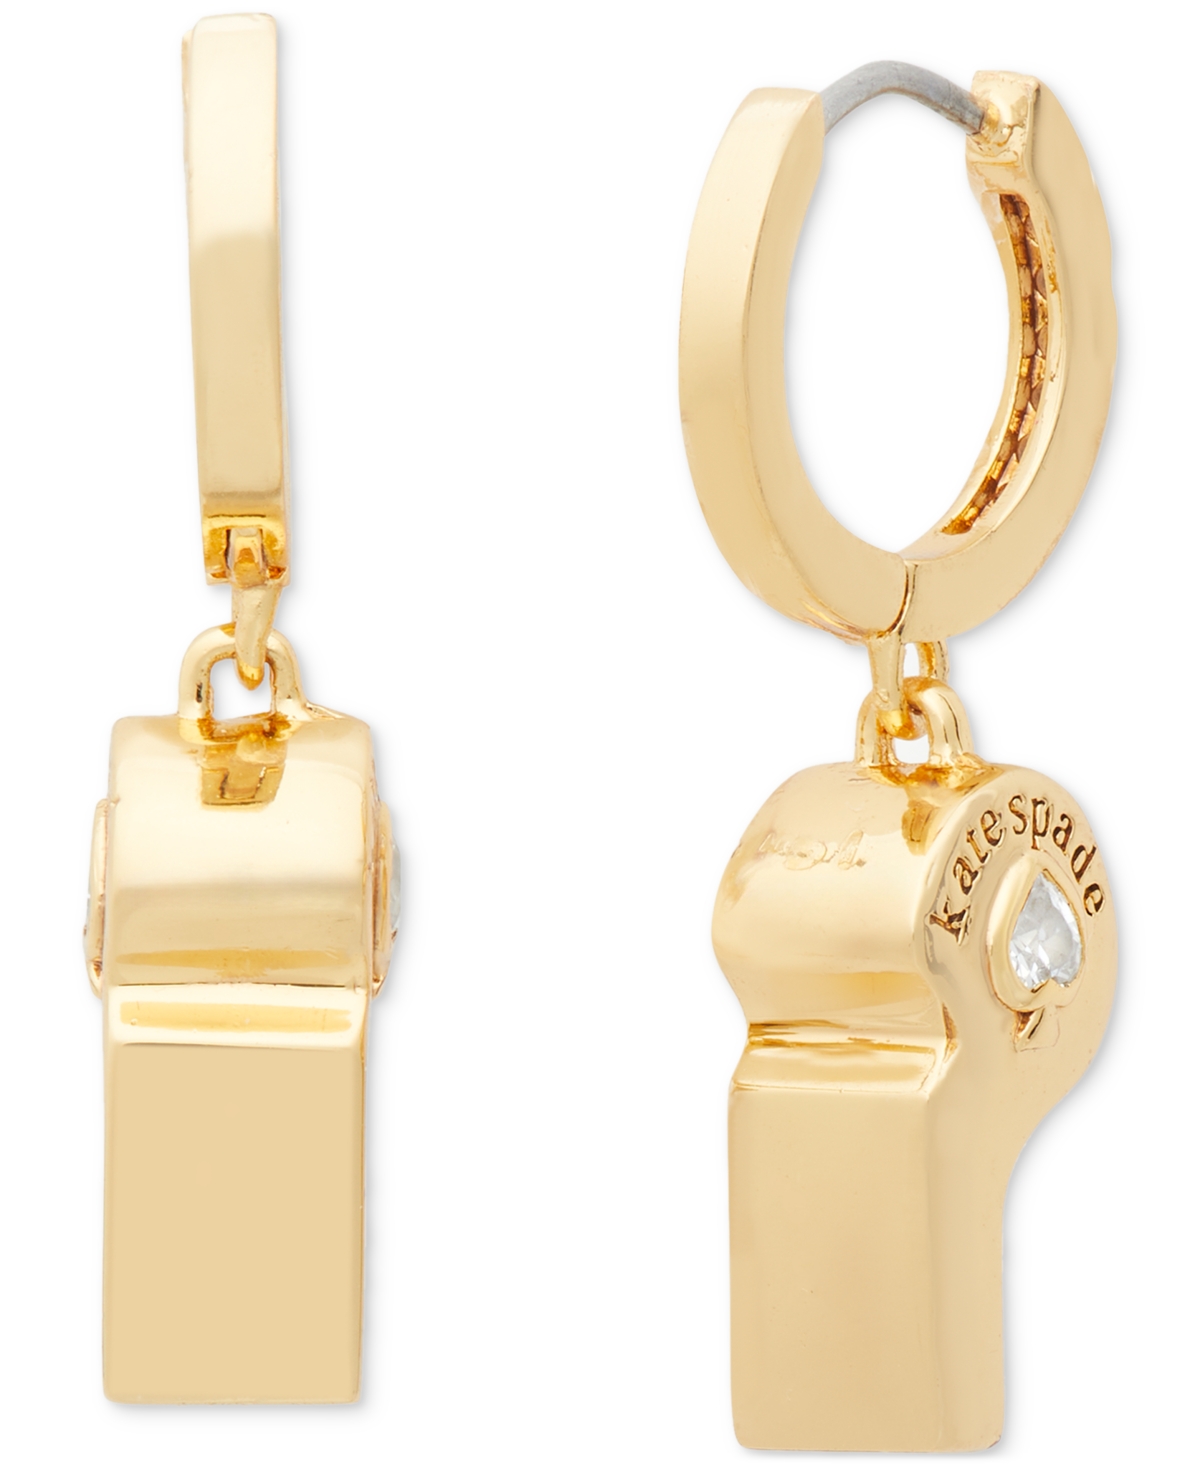 Gold-Tone Crystal Spade Whistle Charm Hoop Earrings - Clear/gold